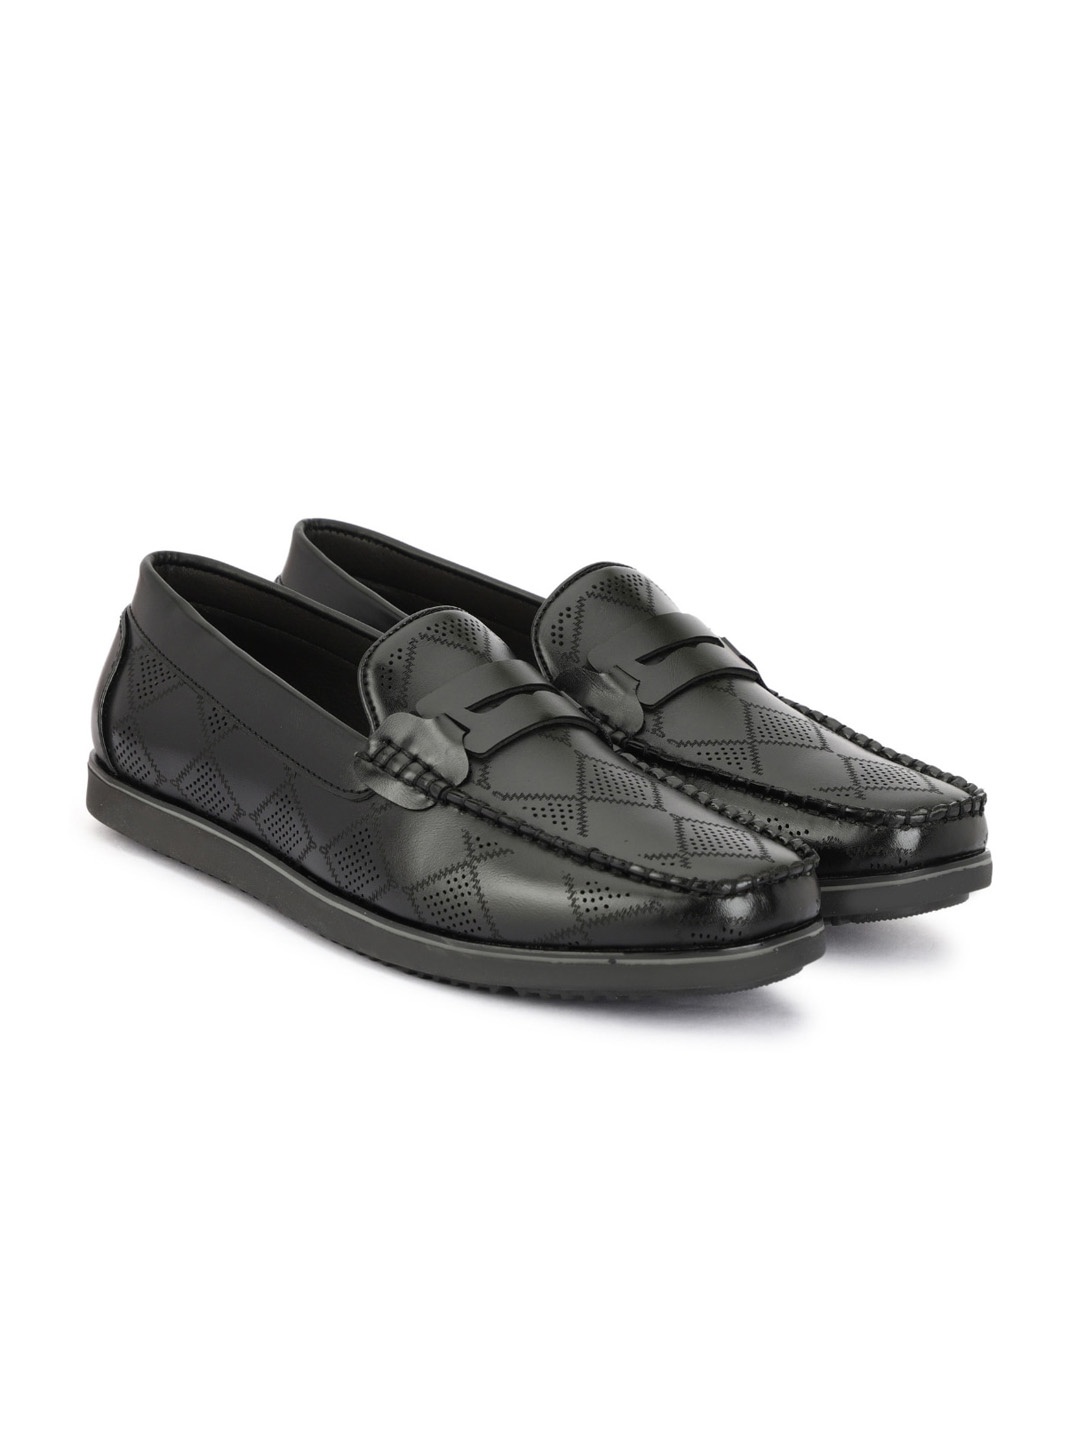 

SHOZANIA Men Textured Leather Penny Loafers, Black